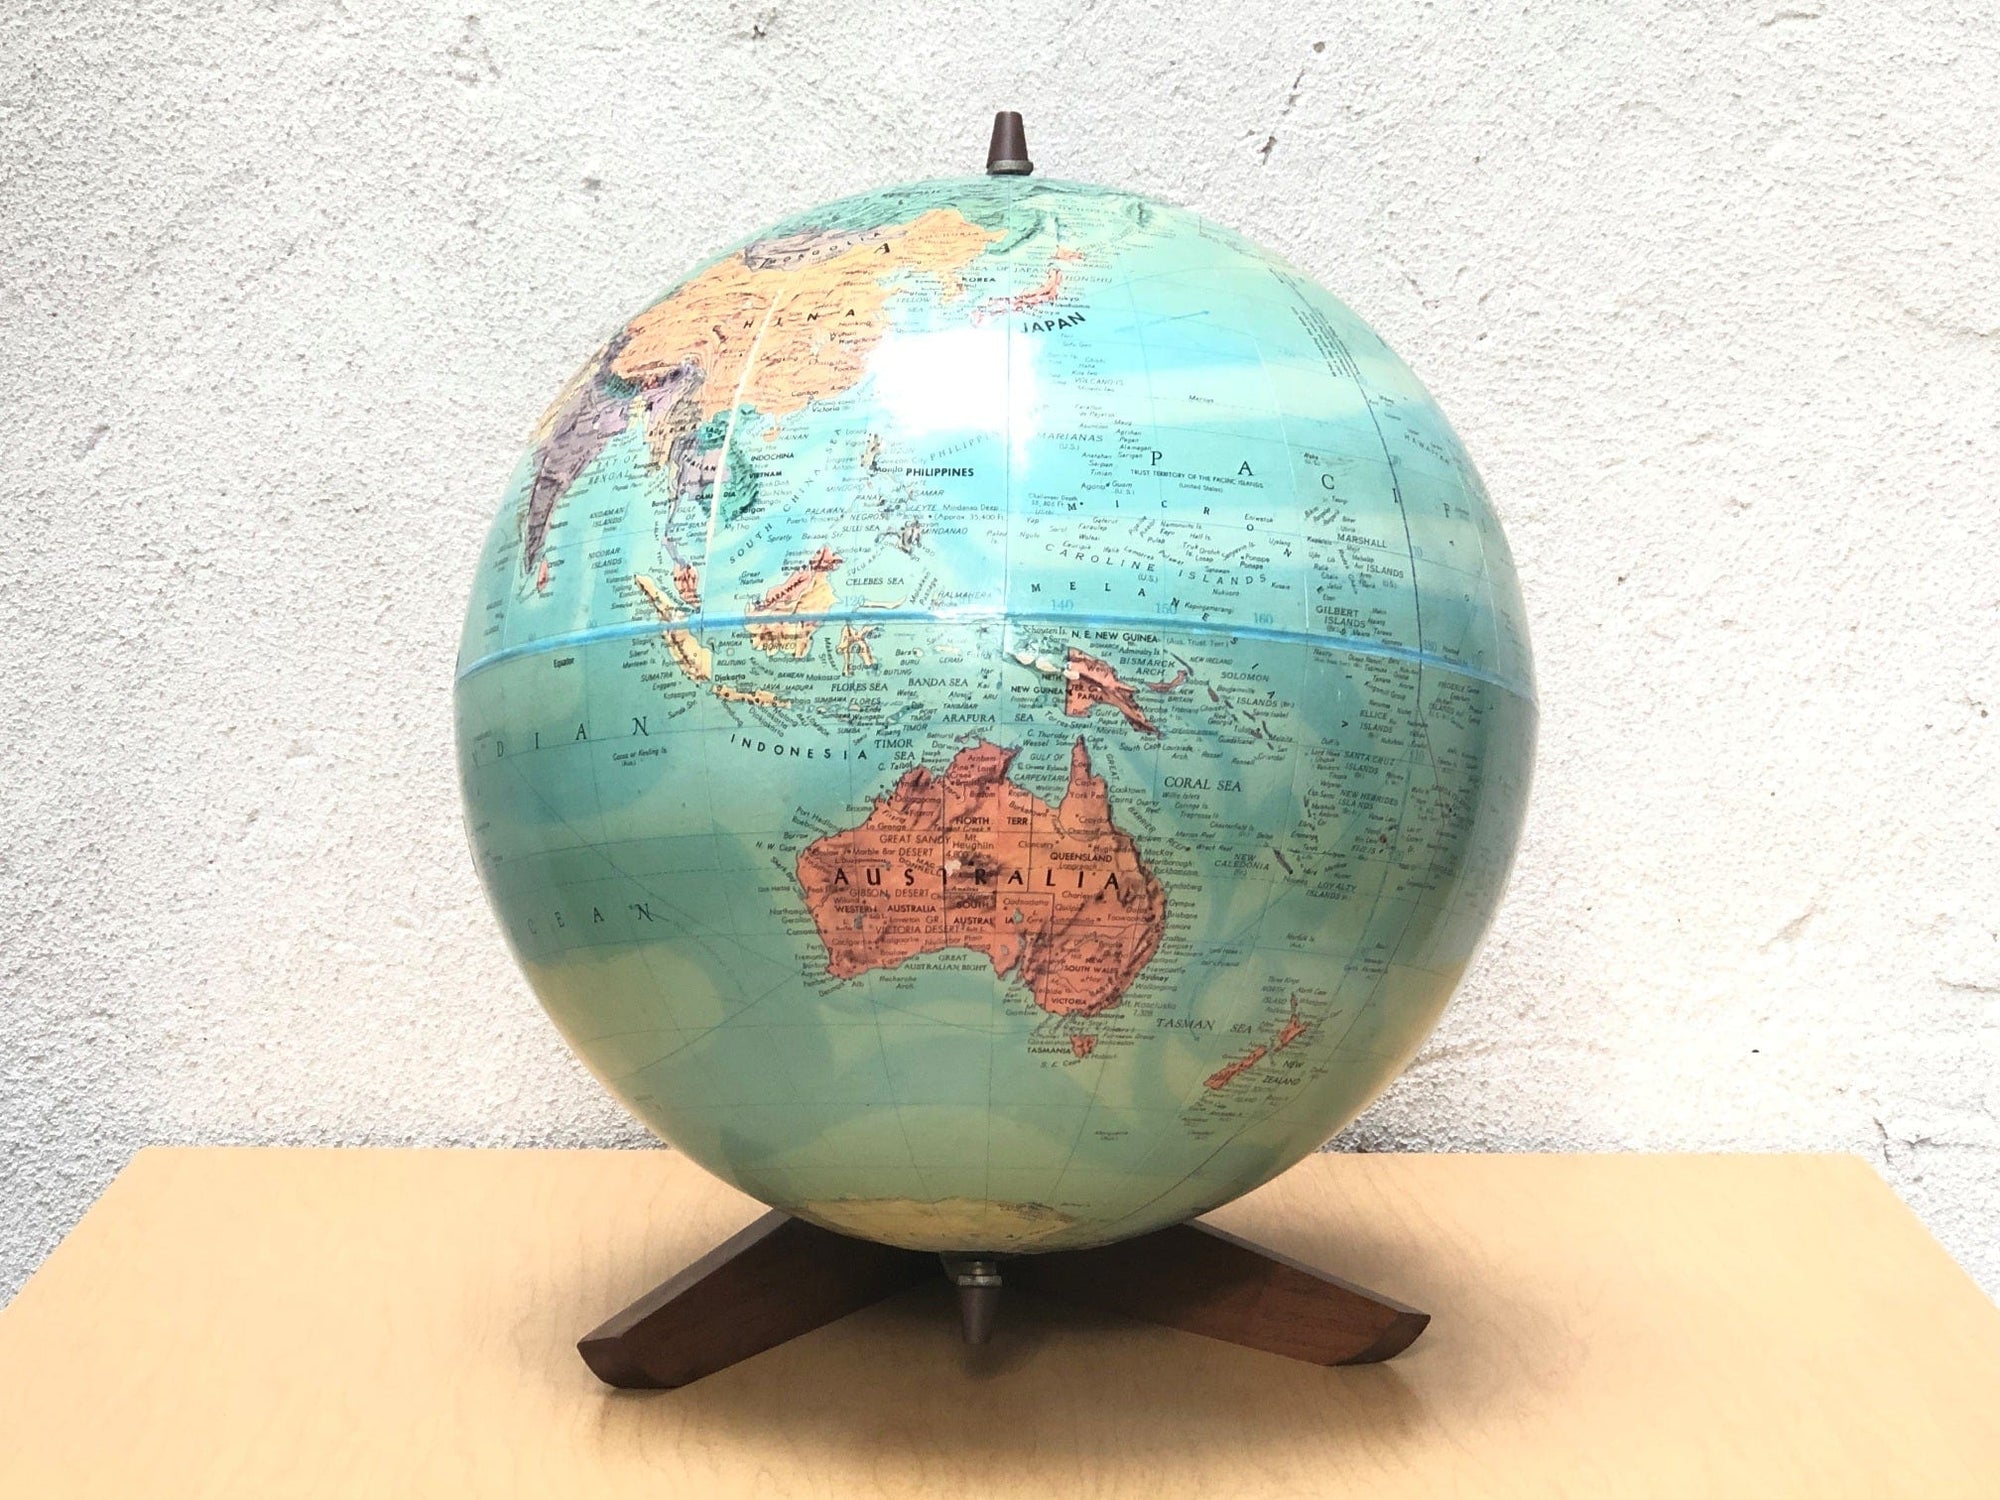 I Like Mike's Mid Century Modern Accessories Replogle Sterio Relief 12" Globe on Danish Modern Wood Stand, Raised Geography, Circa 1970